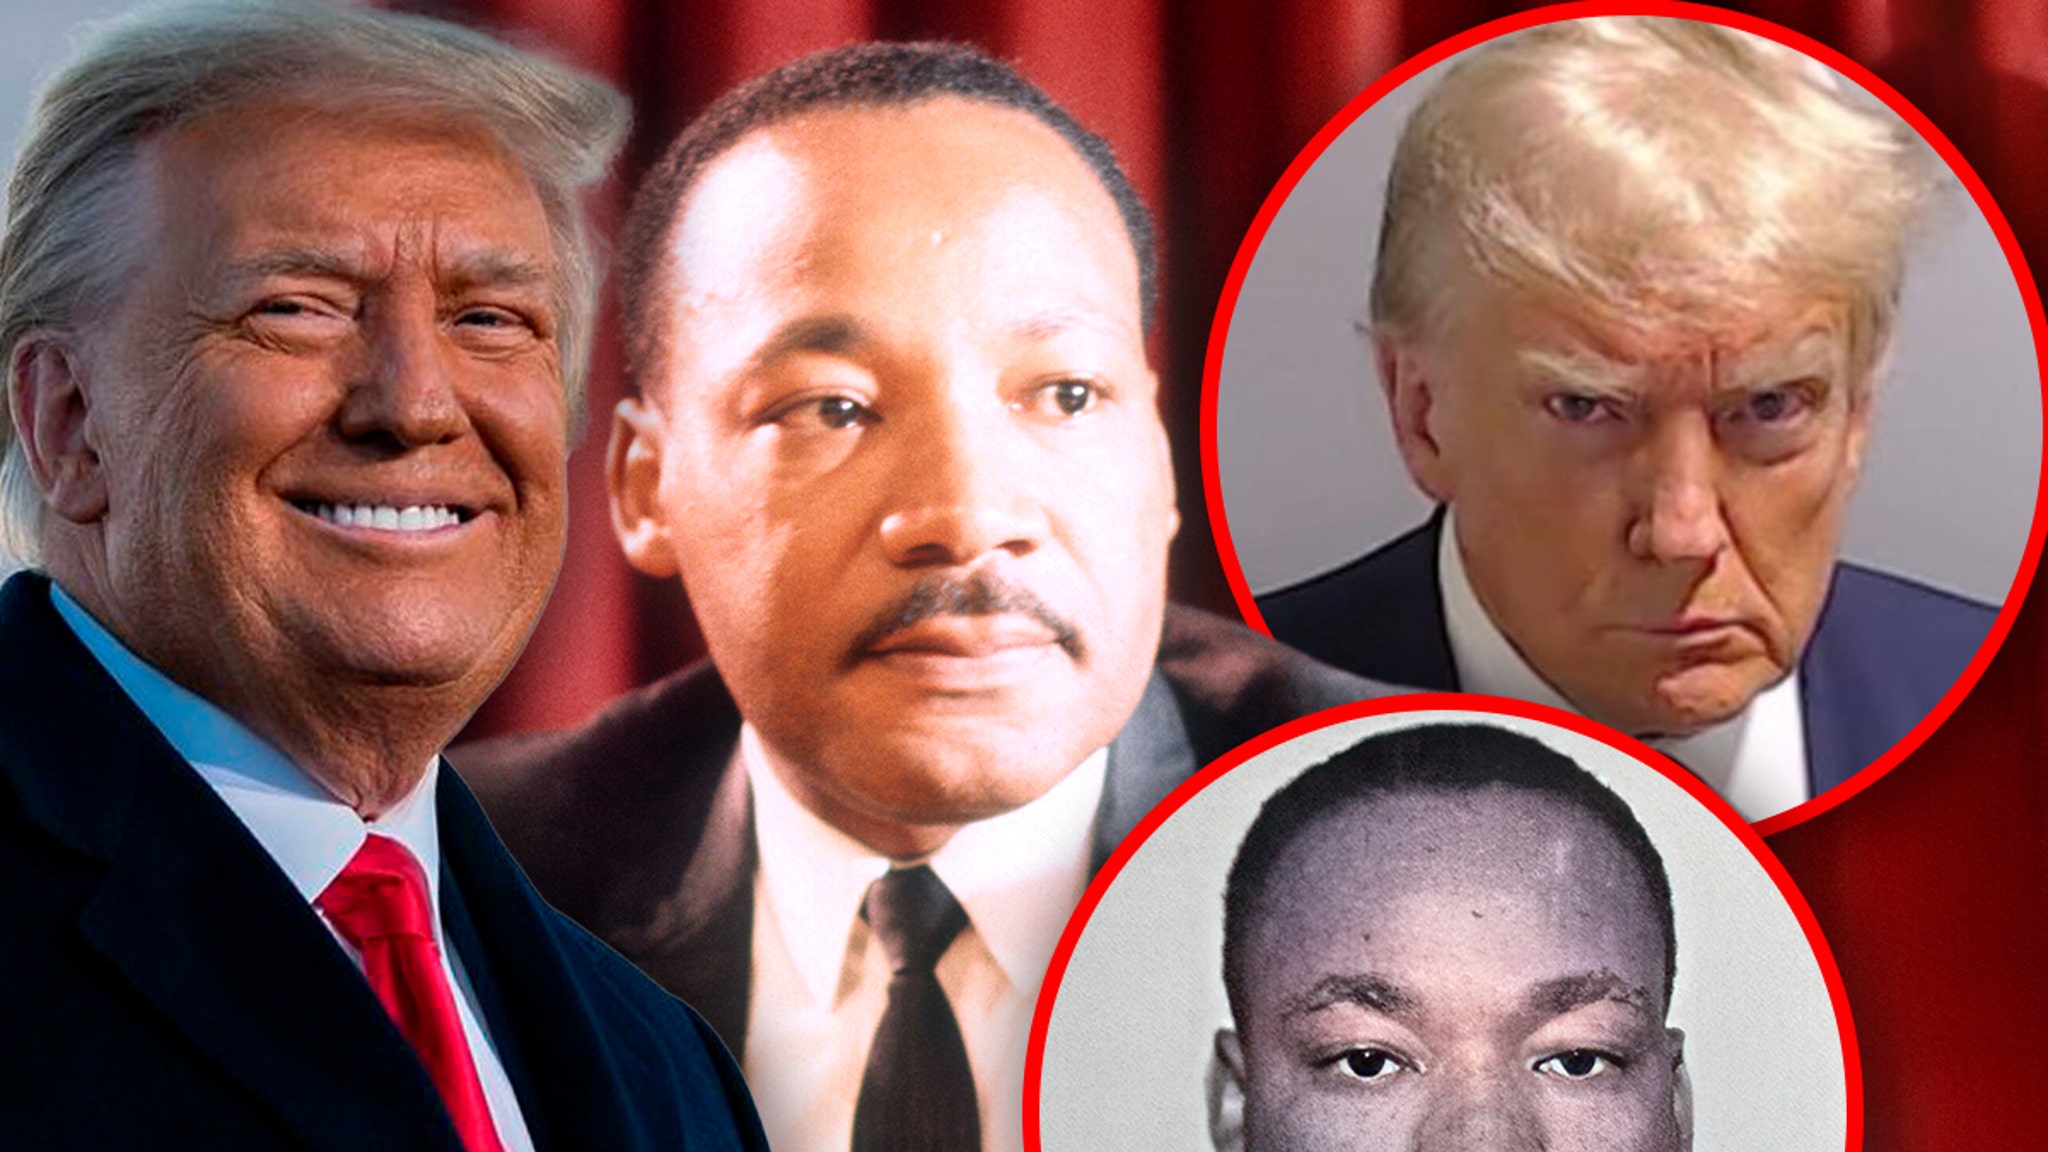 Trump’s Mugshot Compared to MLK on March on Washington’s 60th Anniversary